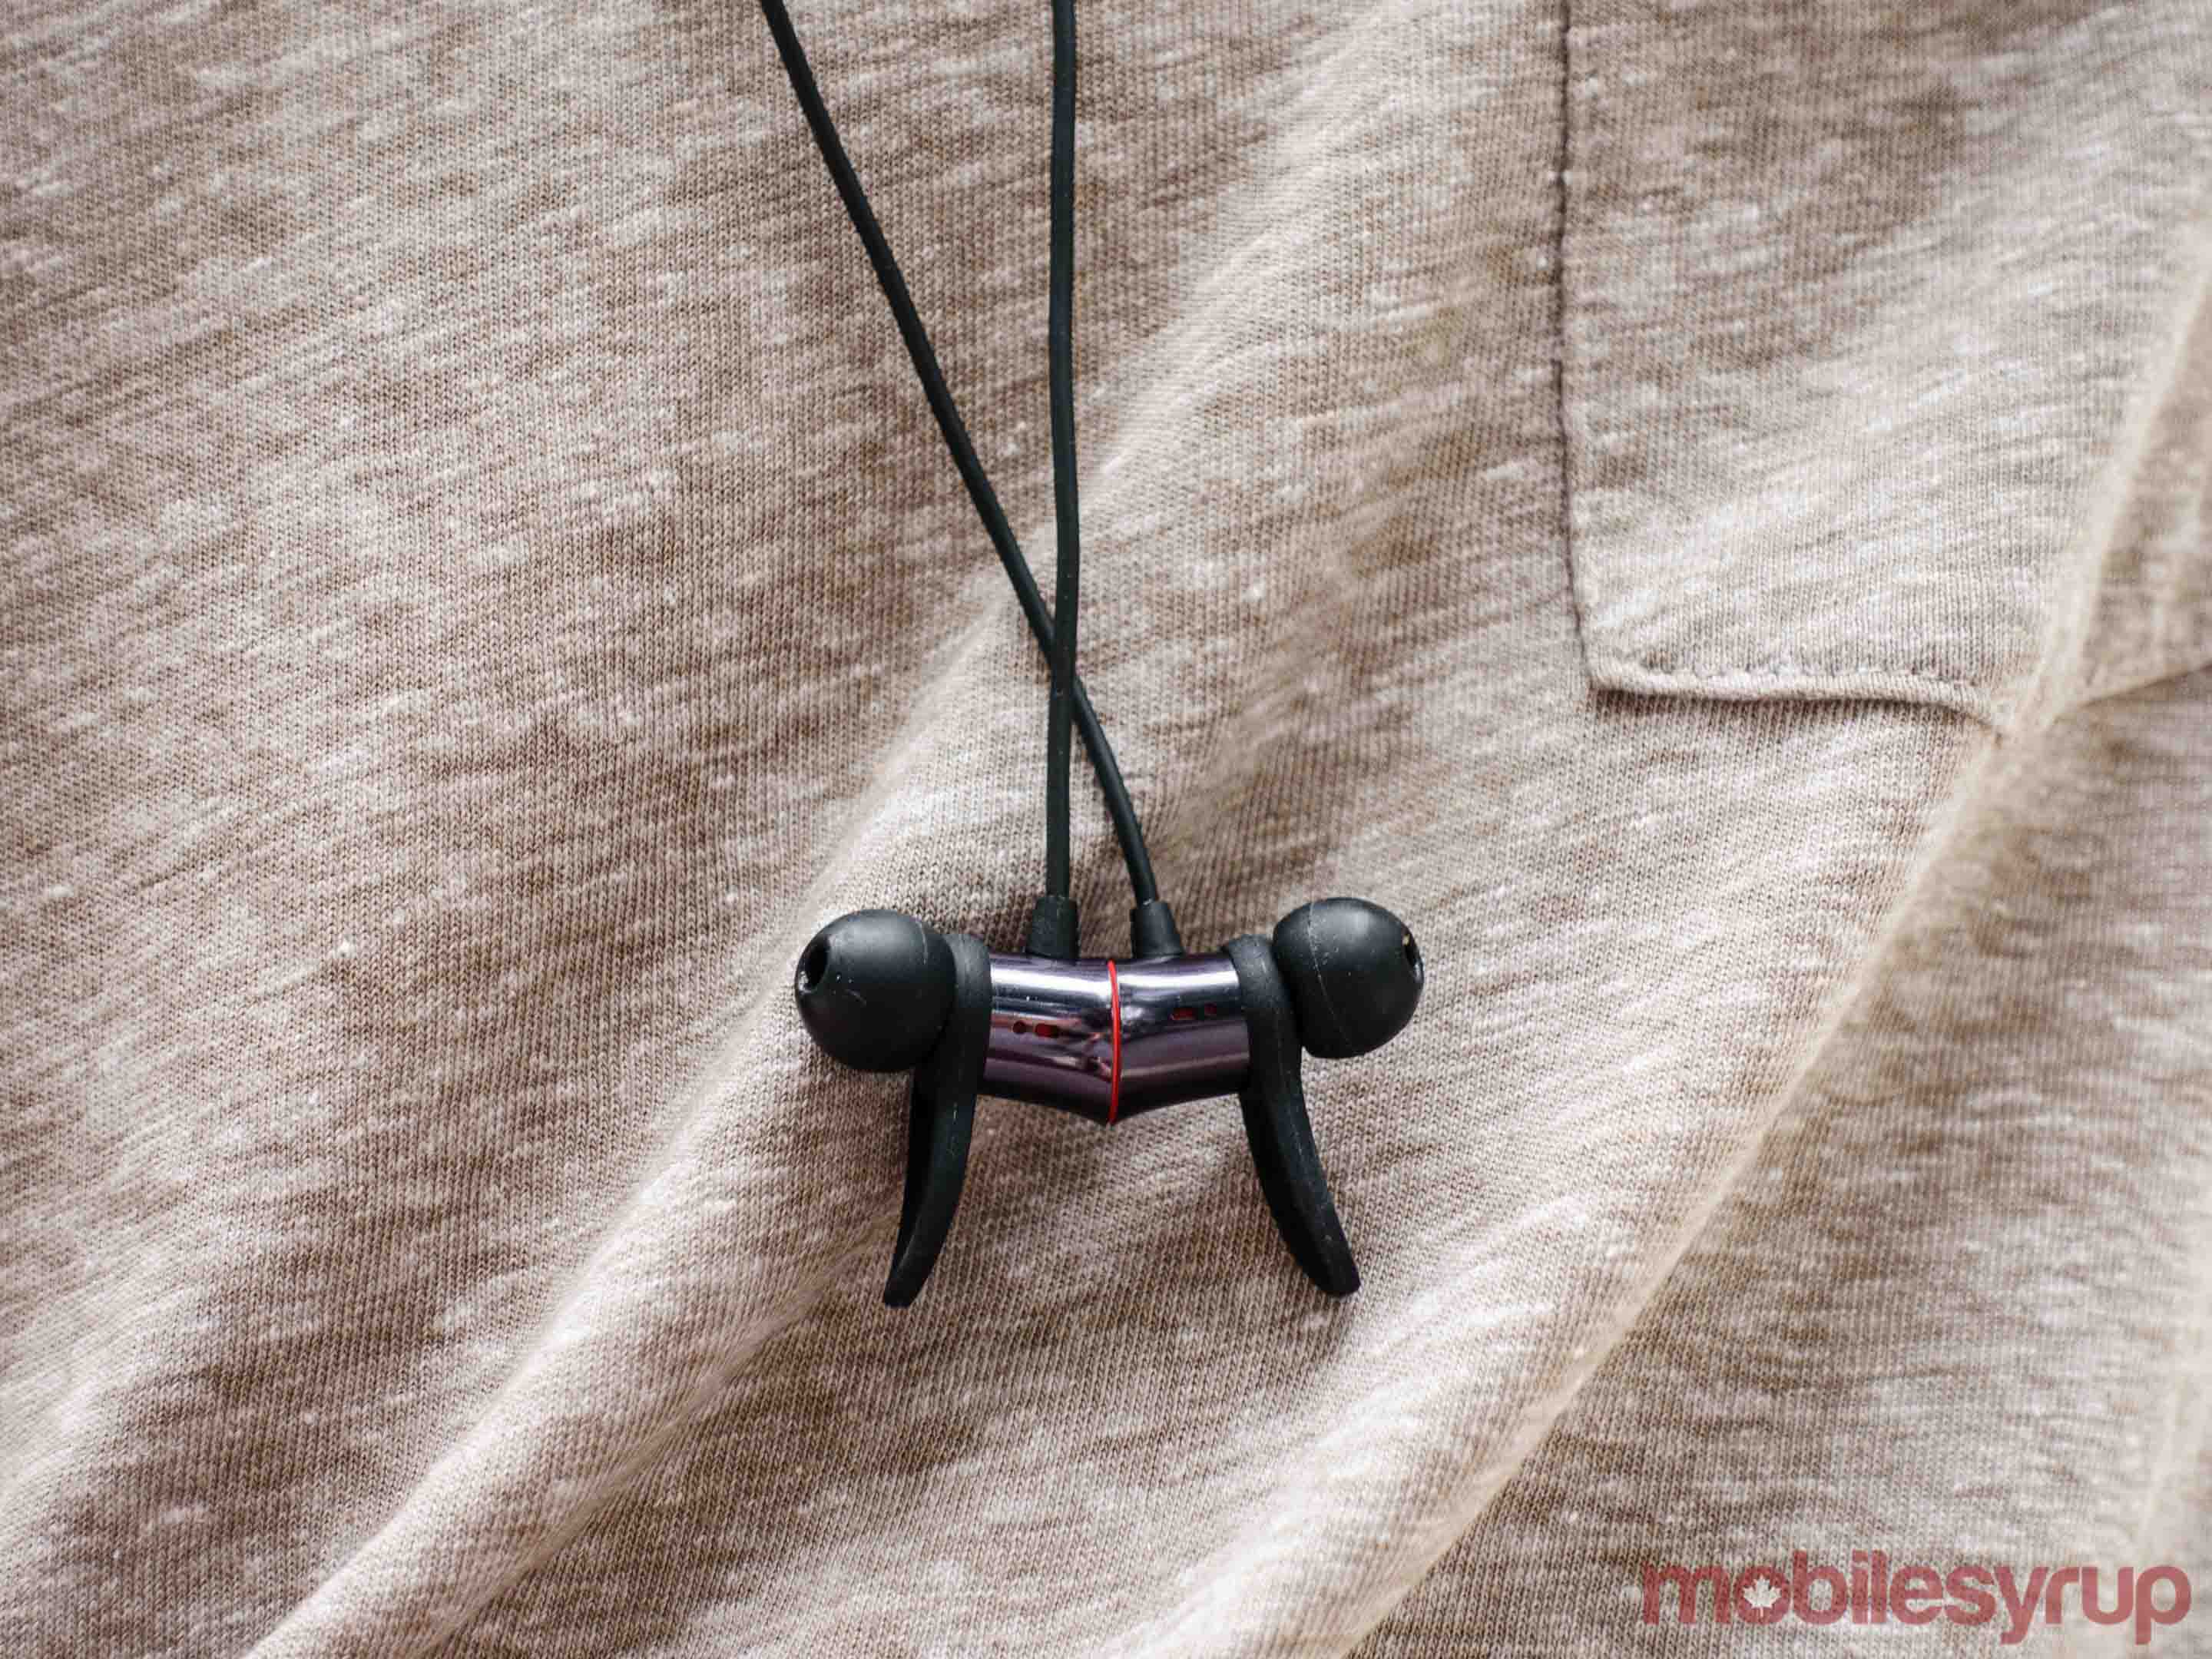 The Bullets Wireless drivers are magnetized